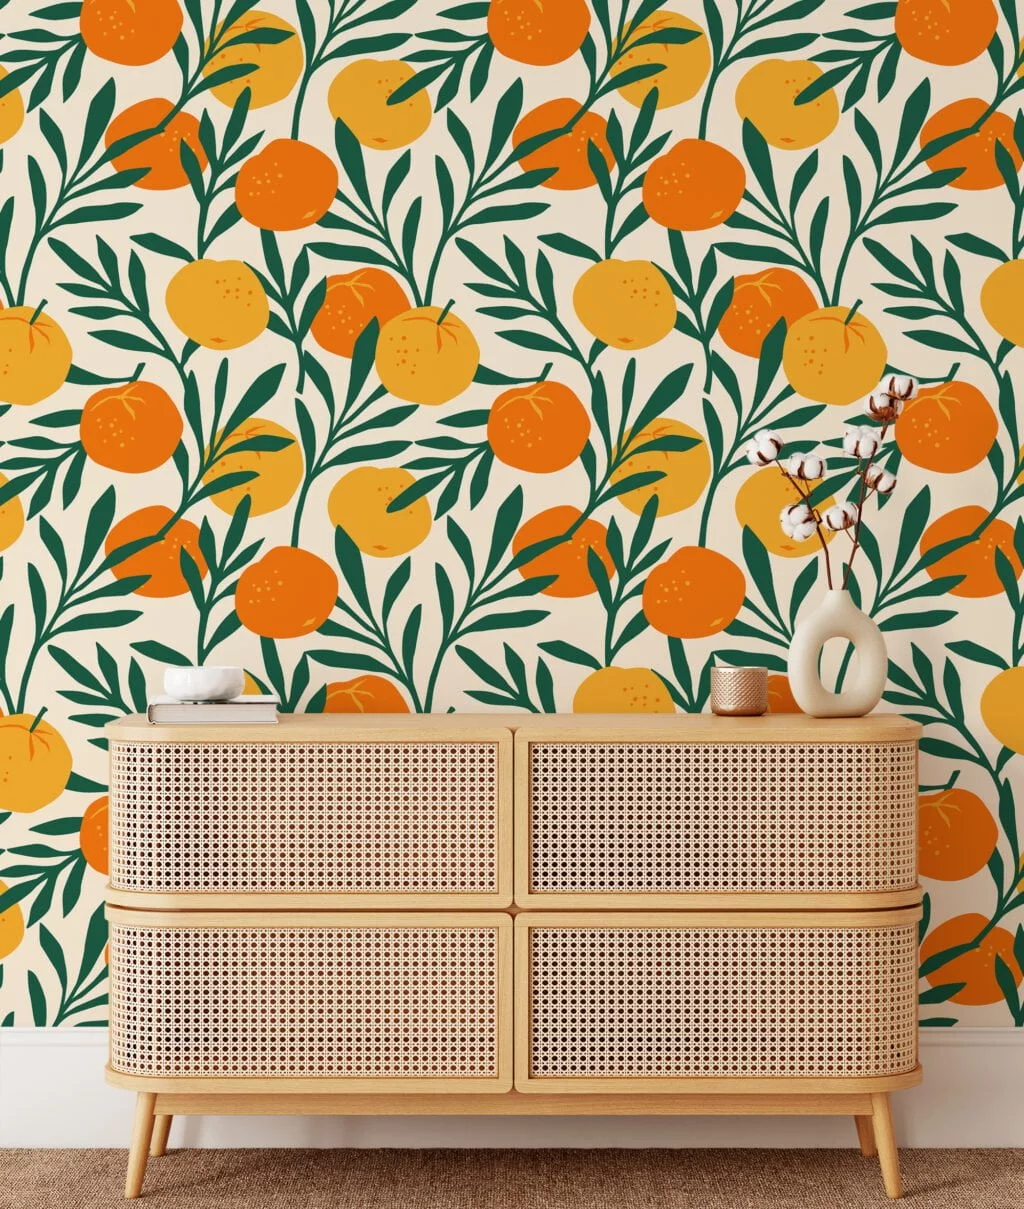 Flat Art Oranges Pattern Illustration Wallpaper, Lively Green Leaves with Citrus Peel & Stick Wall Mural